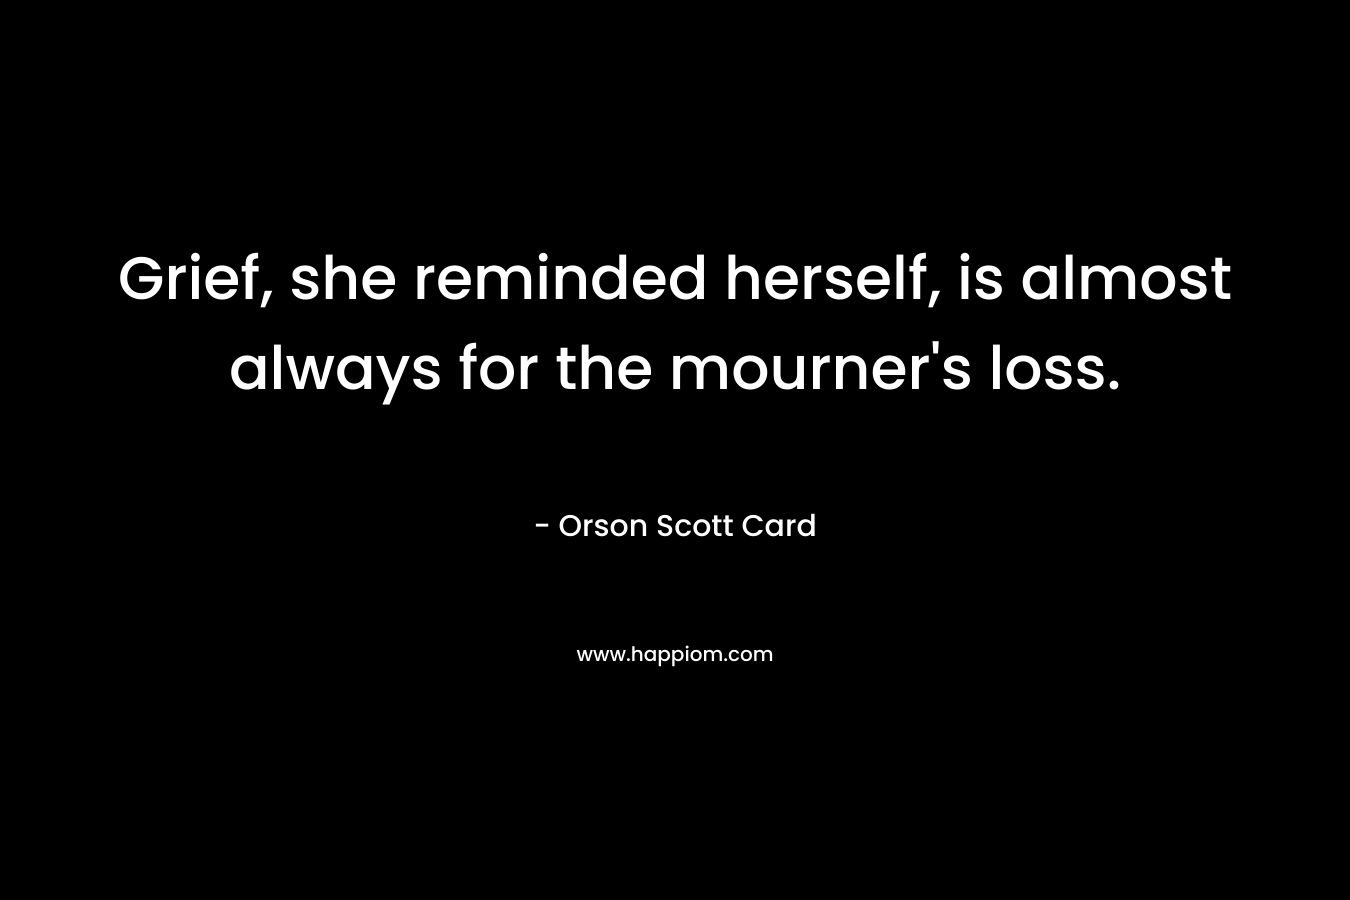 Grief, she reminded herself, is almost always for the mourner's loss.